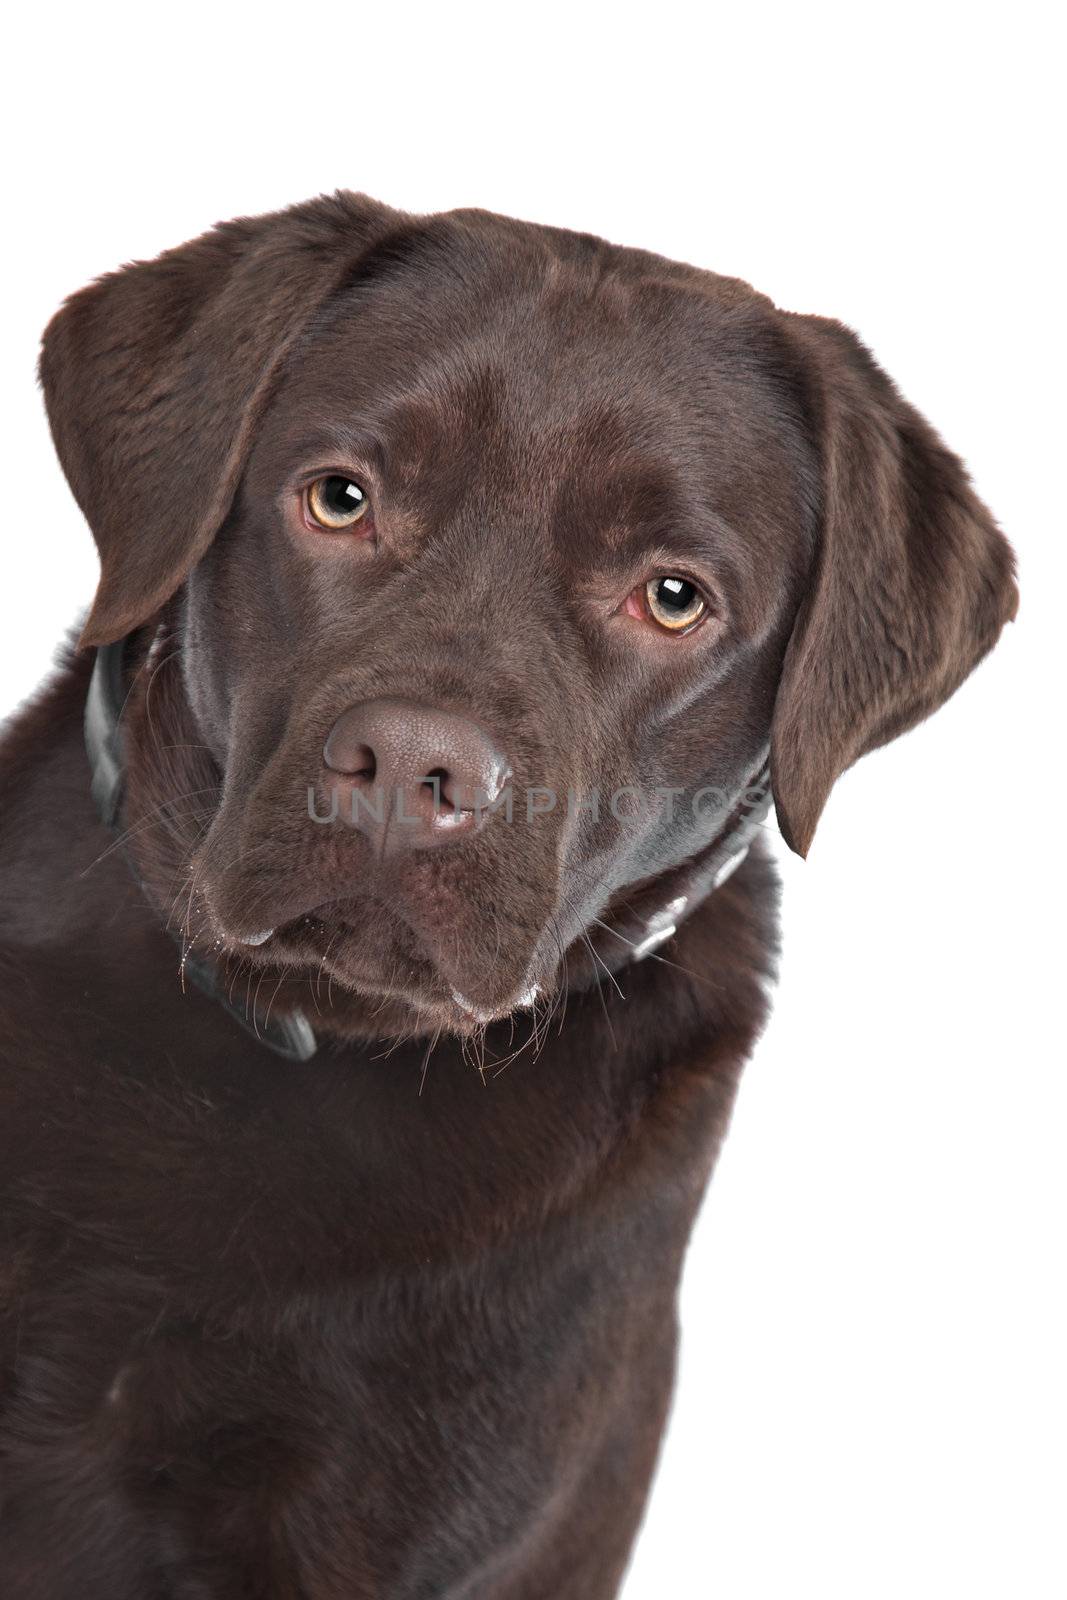 Chocolate Labrador in front of a white background